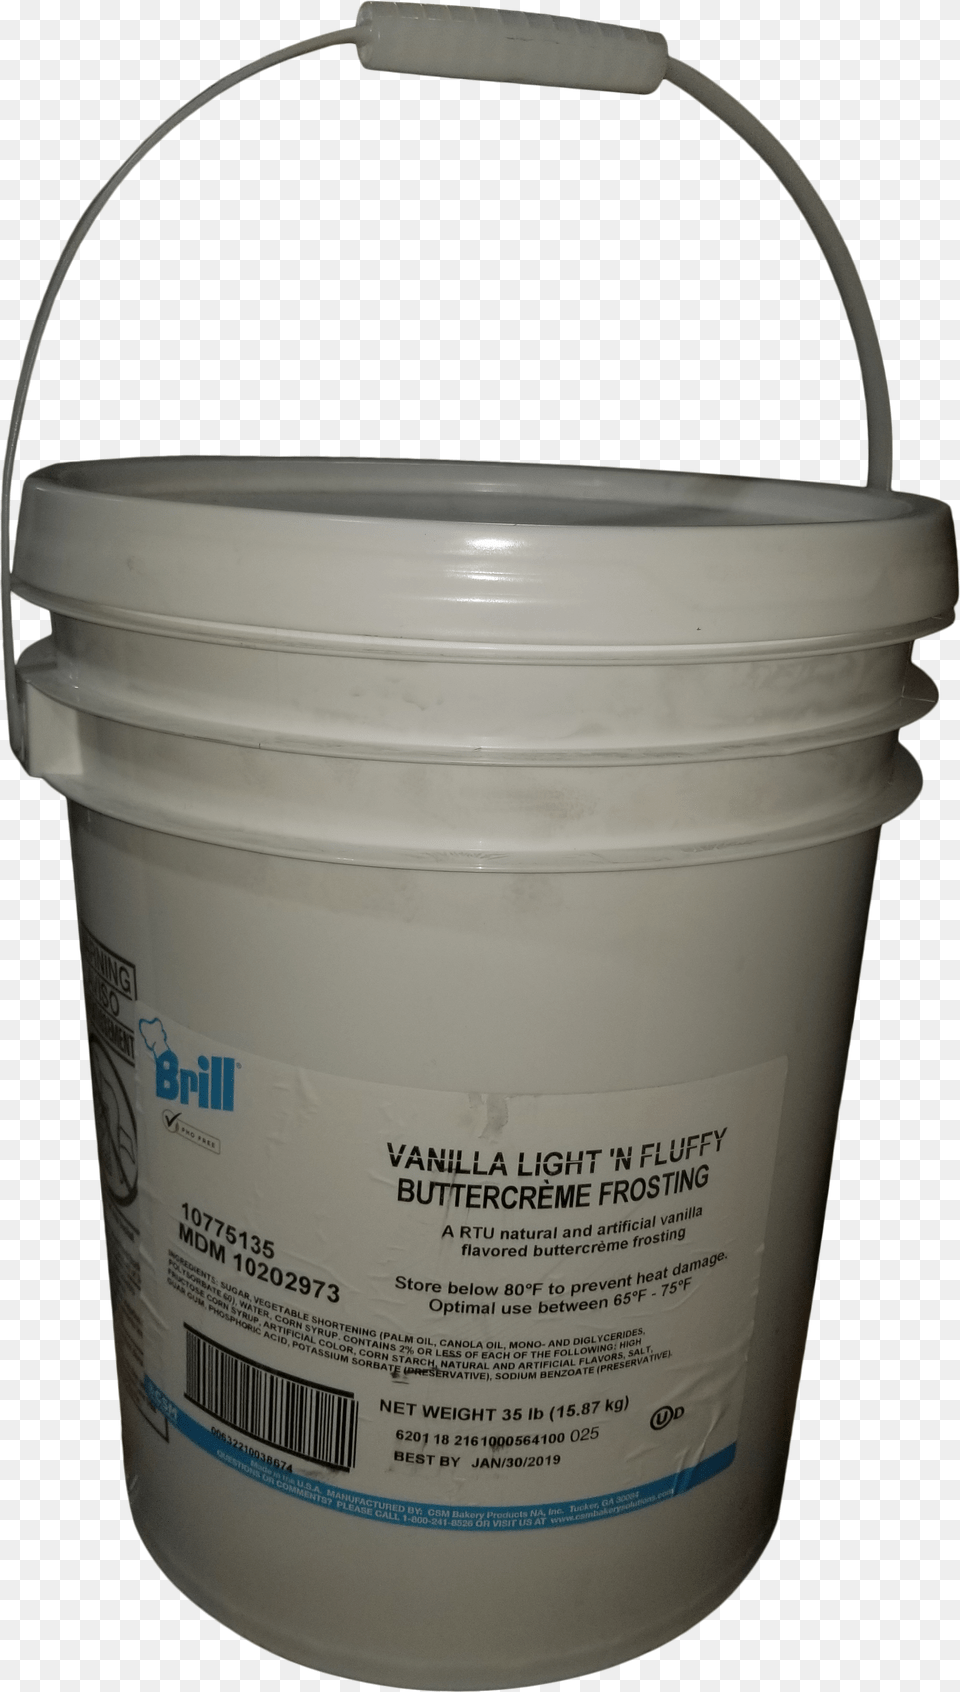 Vanilla Light N Fluffy Icing Butter Creme Icing, Bucket, Bottle, Shaker Free Png